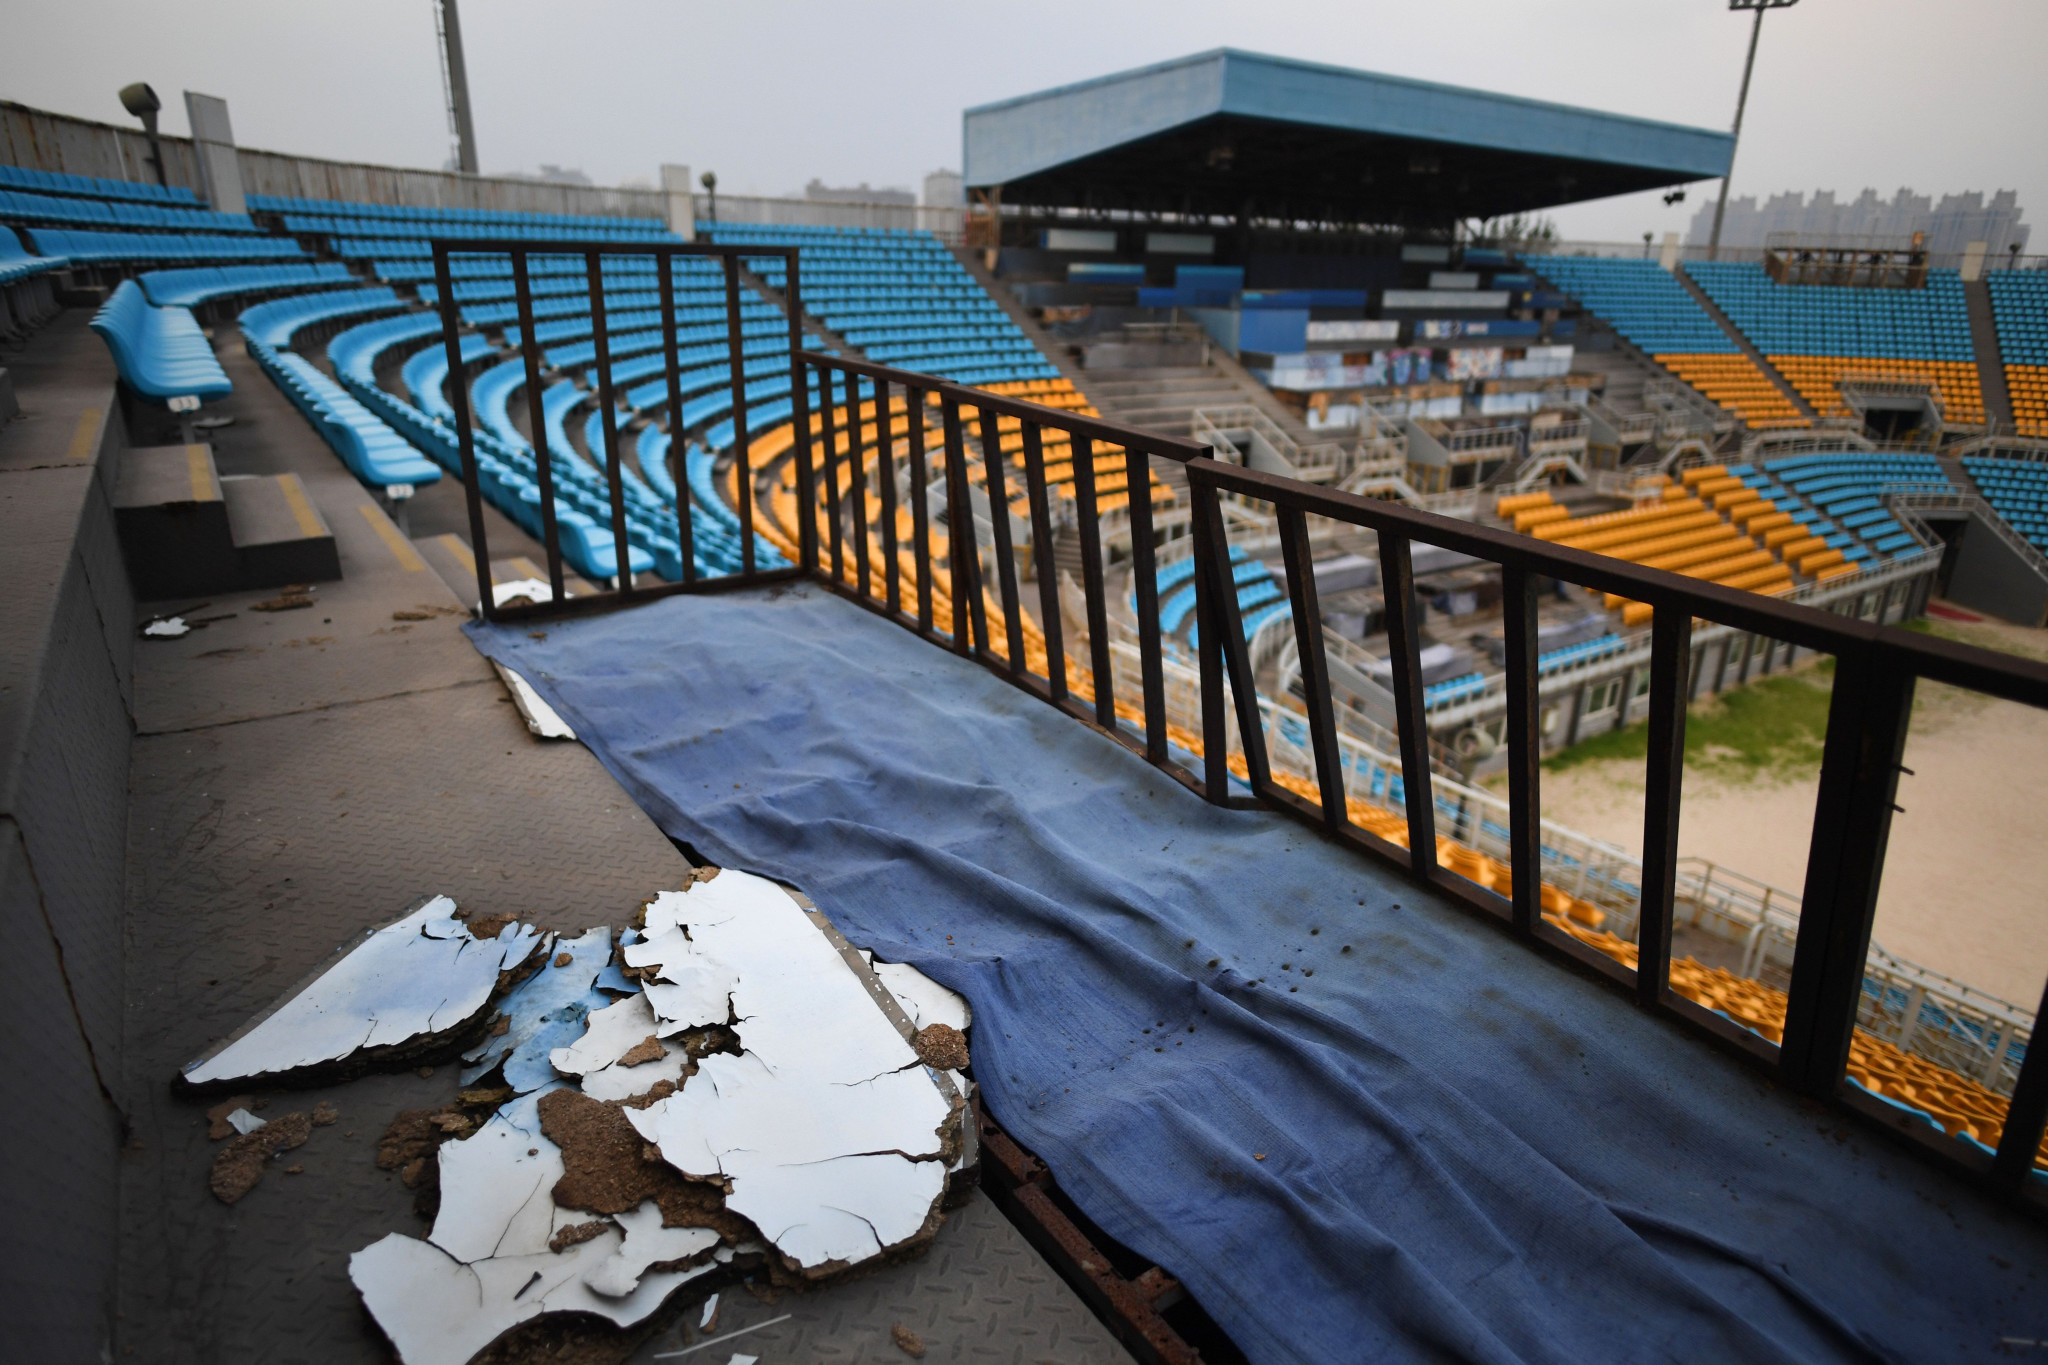 Pictures have emerged of decaying state of some of the facilities from the 2008 Olympics in Beijing ©Getty Images